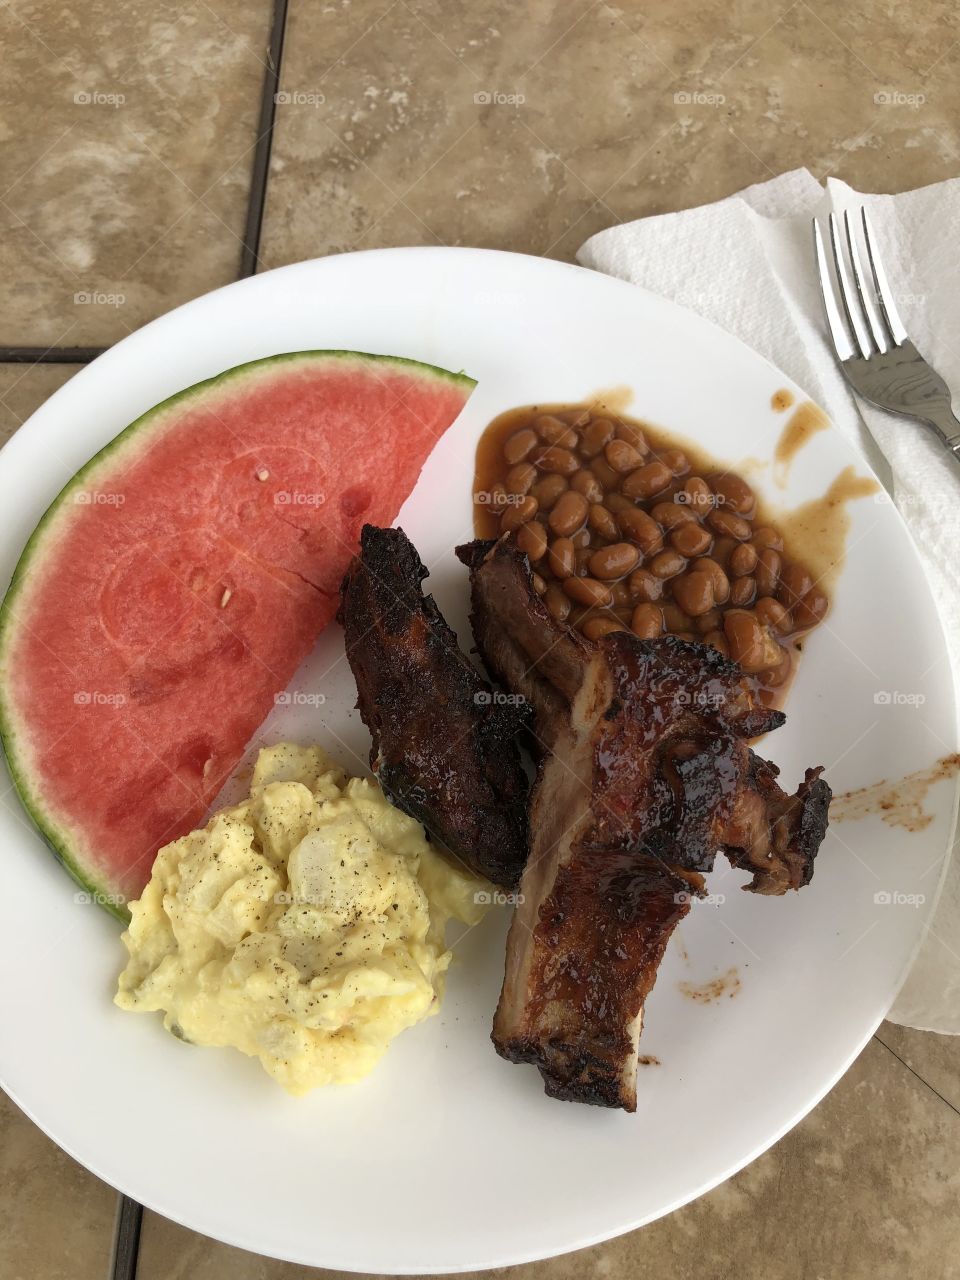 Backyard cookout ( ribs, baked beans,potato salad and Watermelon)